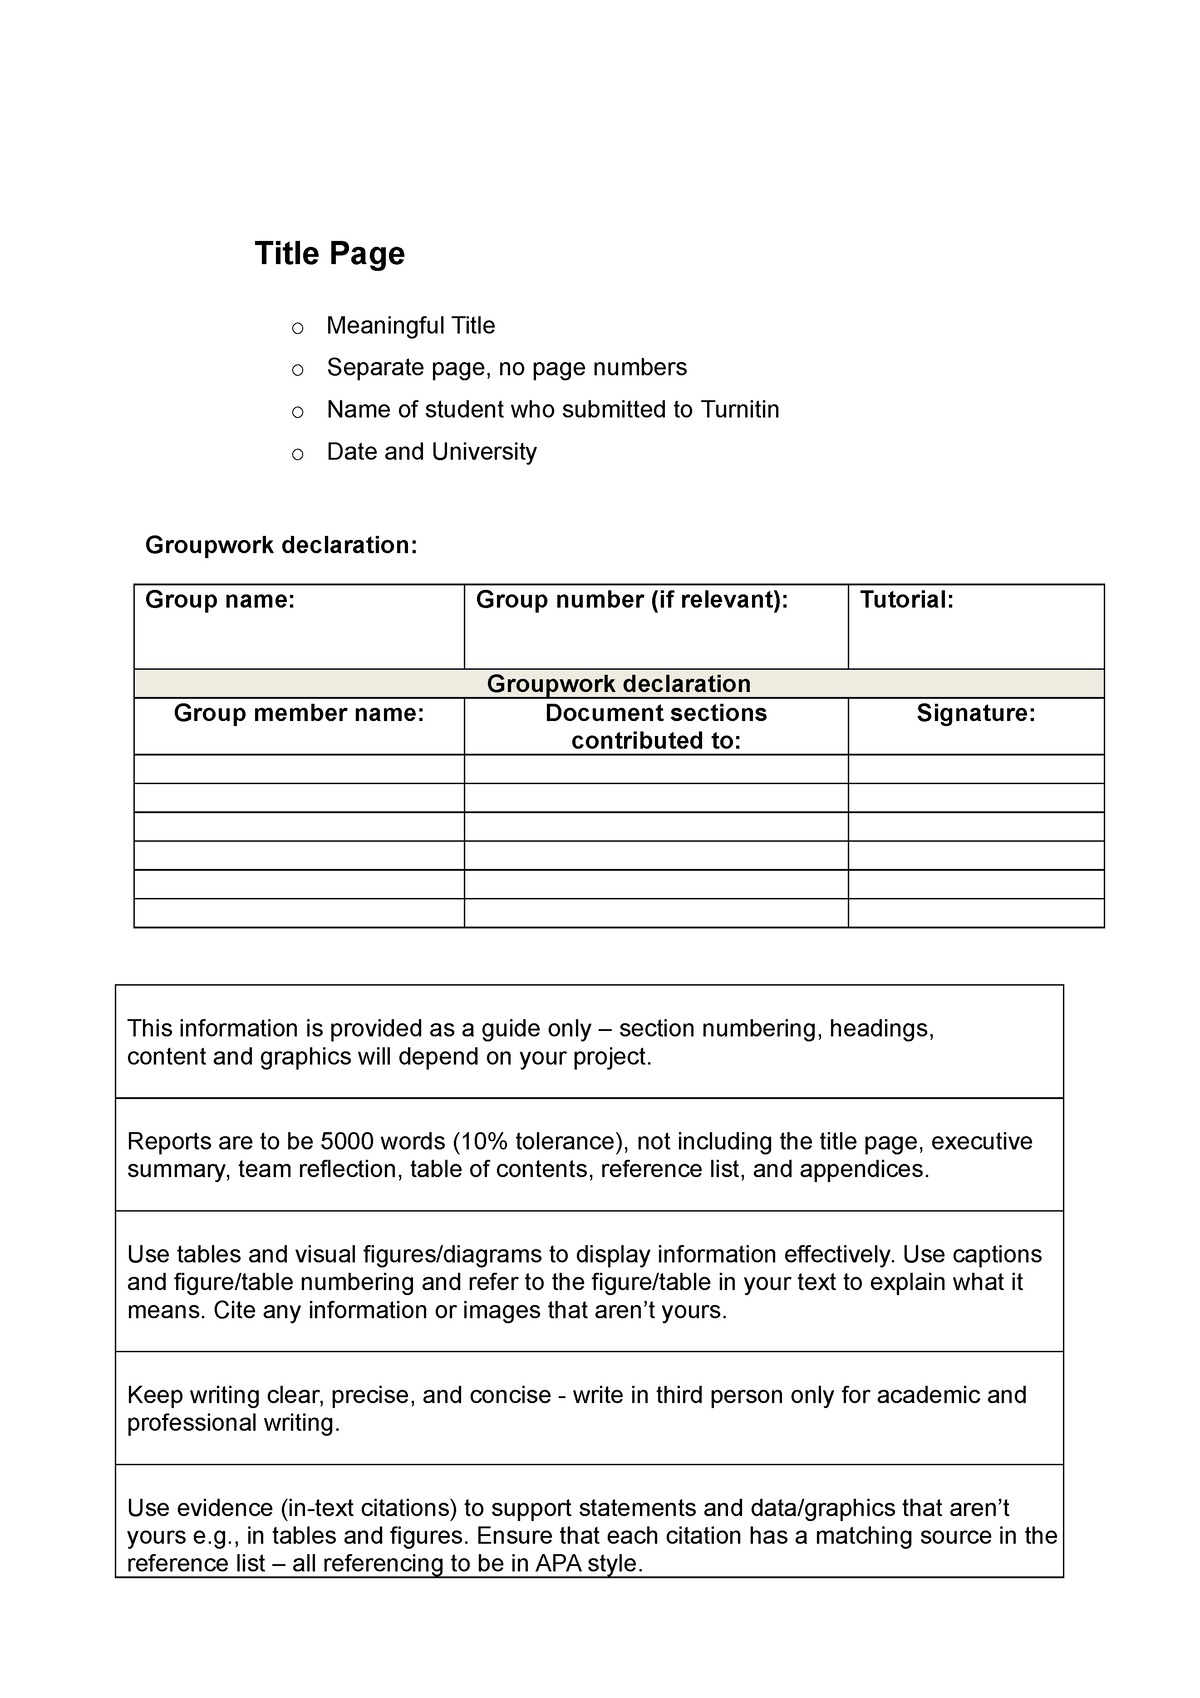 Team Final Report Template SPR21 - Title Page o Meaningful Title o ...